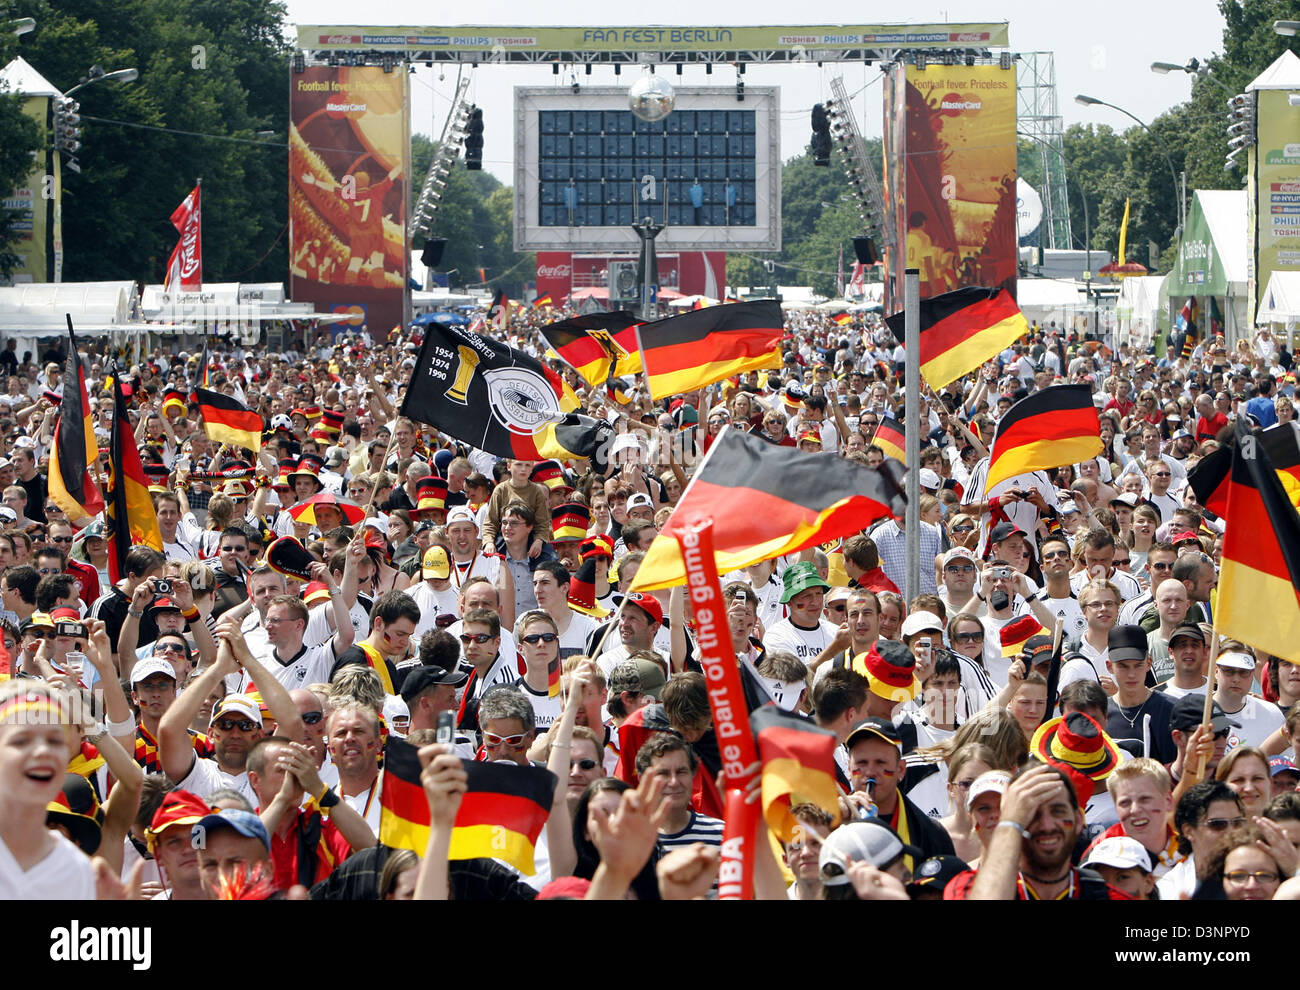 Supporters of the German national soccer team celebrate in the fan zone prior to the 2006 FIFA World Cup group A match of Ecuador vs Germany in Berlin, Germany, Tuesday 20 June 2006. DPA/MARCEL METTELSIEFEN  +++(c) dpa - Bildfunk+++ Stock Photo